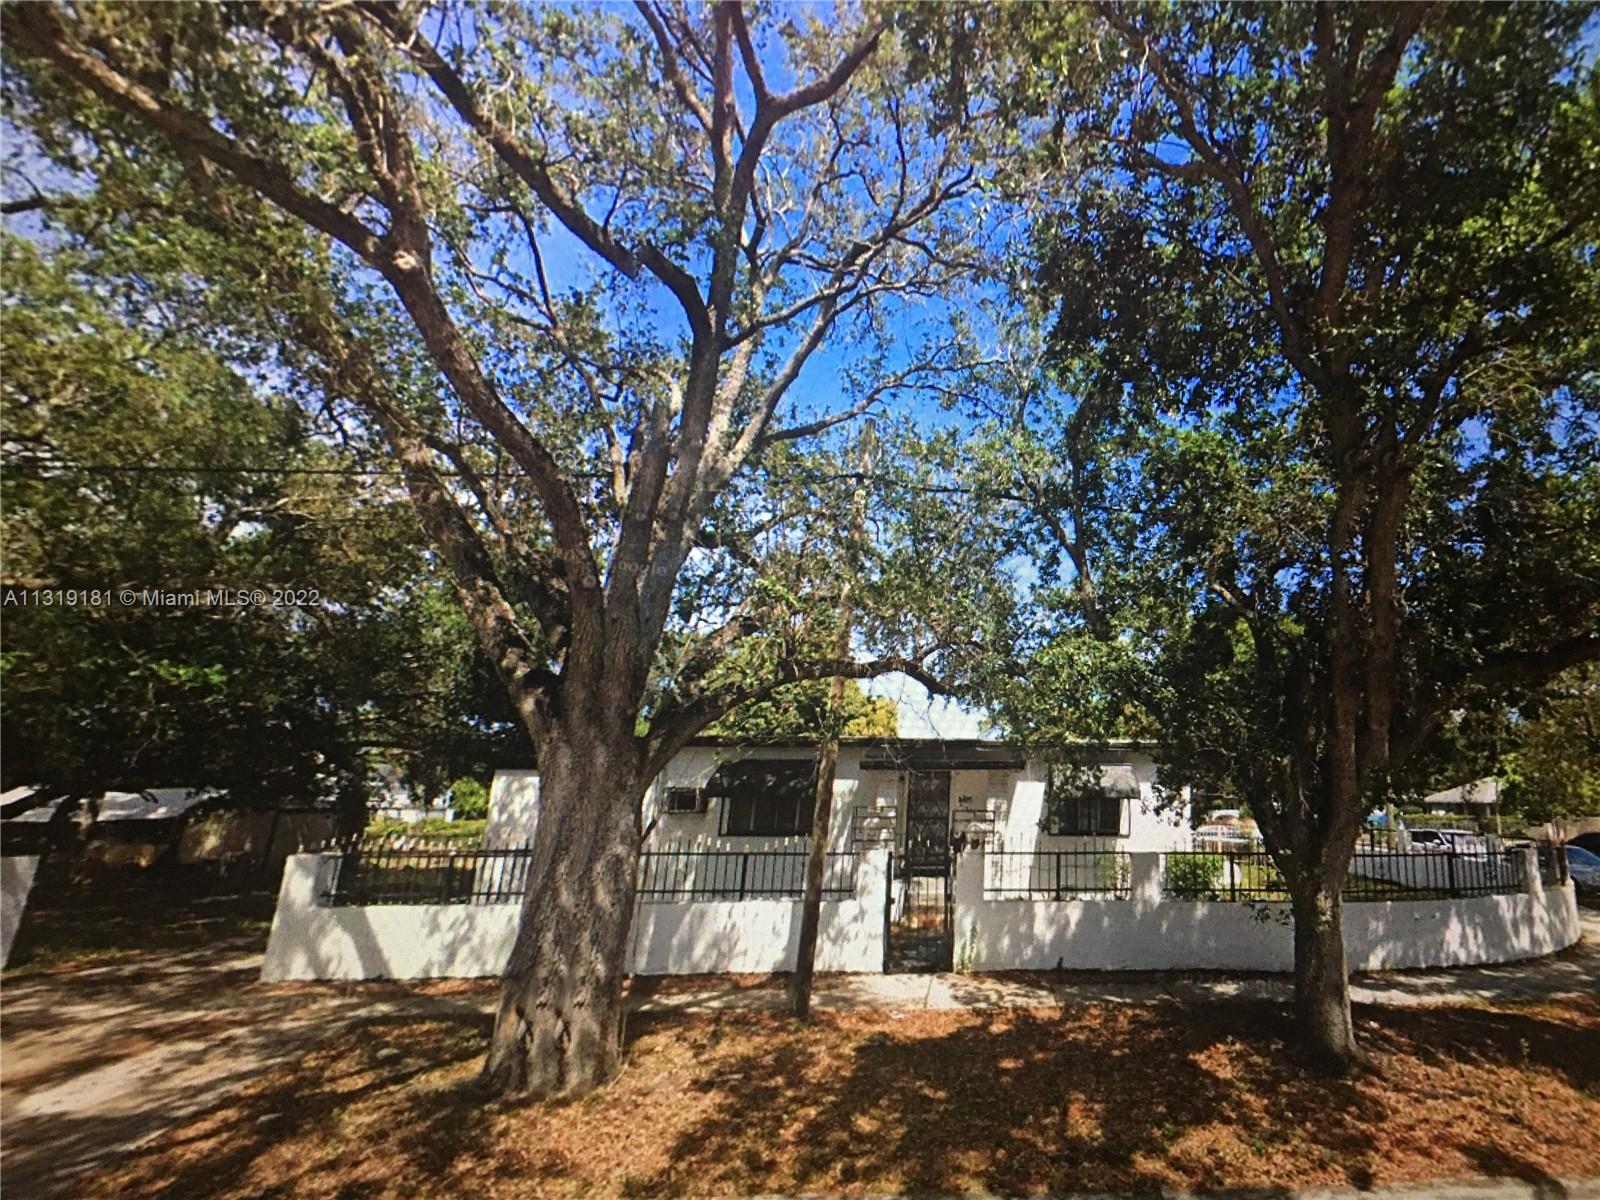 Photo 1 of 4101 3rd Ave in Miami - MLS A11319181